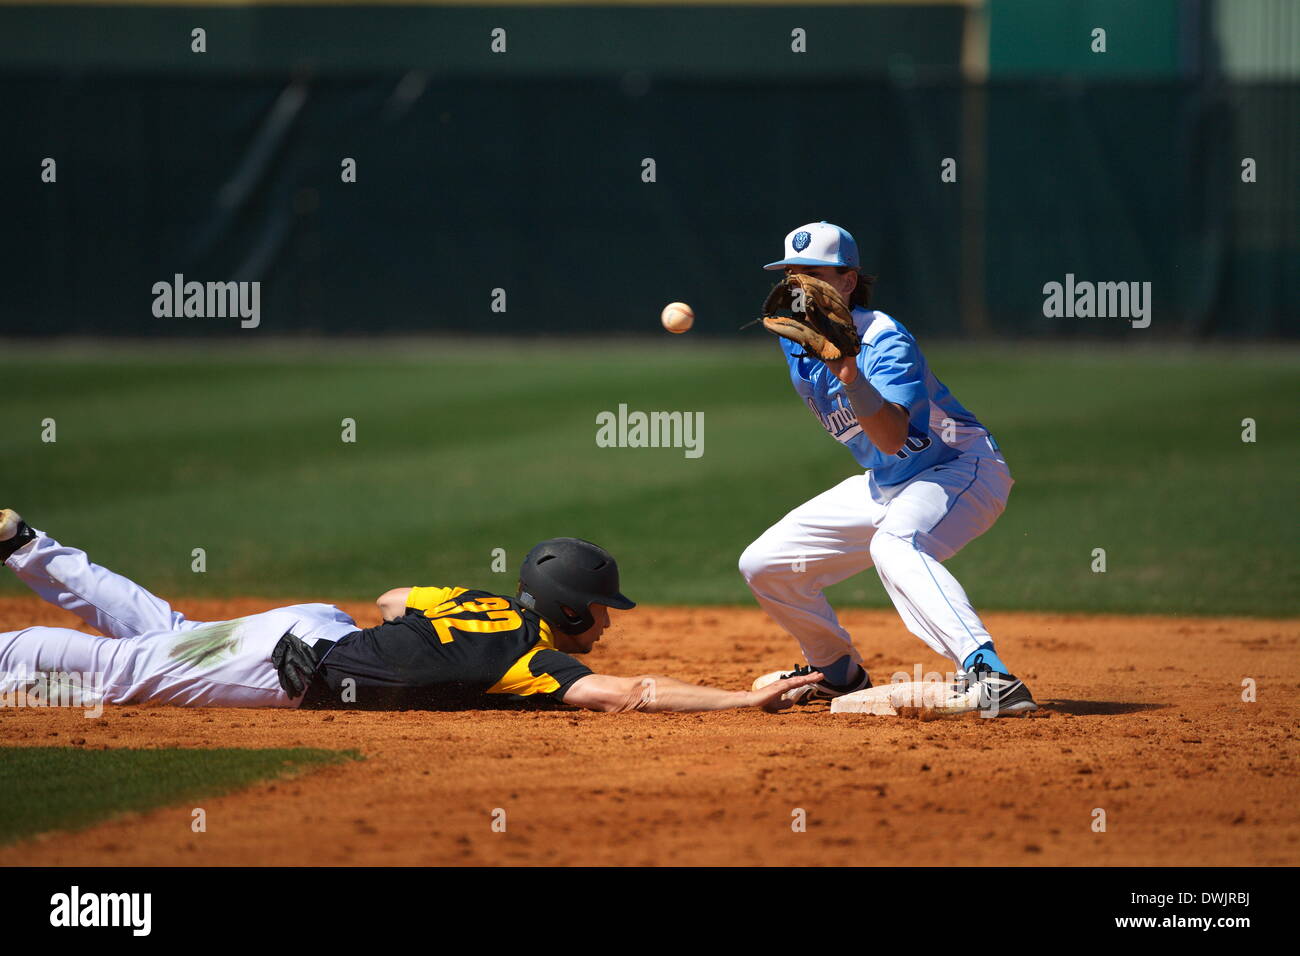 Kennesaw, Georgia, USA.  March 8, 2014 -- Shortstop Aaron Silbar (10) applies the tag durin during the first game of Saturday's doubleheader between Columbia University and Kennesaw State University. The teams split the doubleheader. Credit:  Wayne Hughes | Alamy Live News Stock Photo